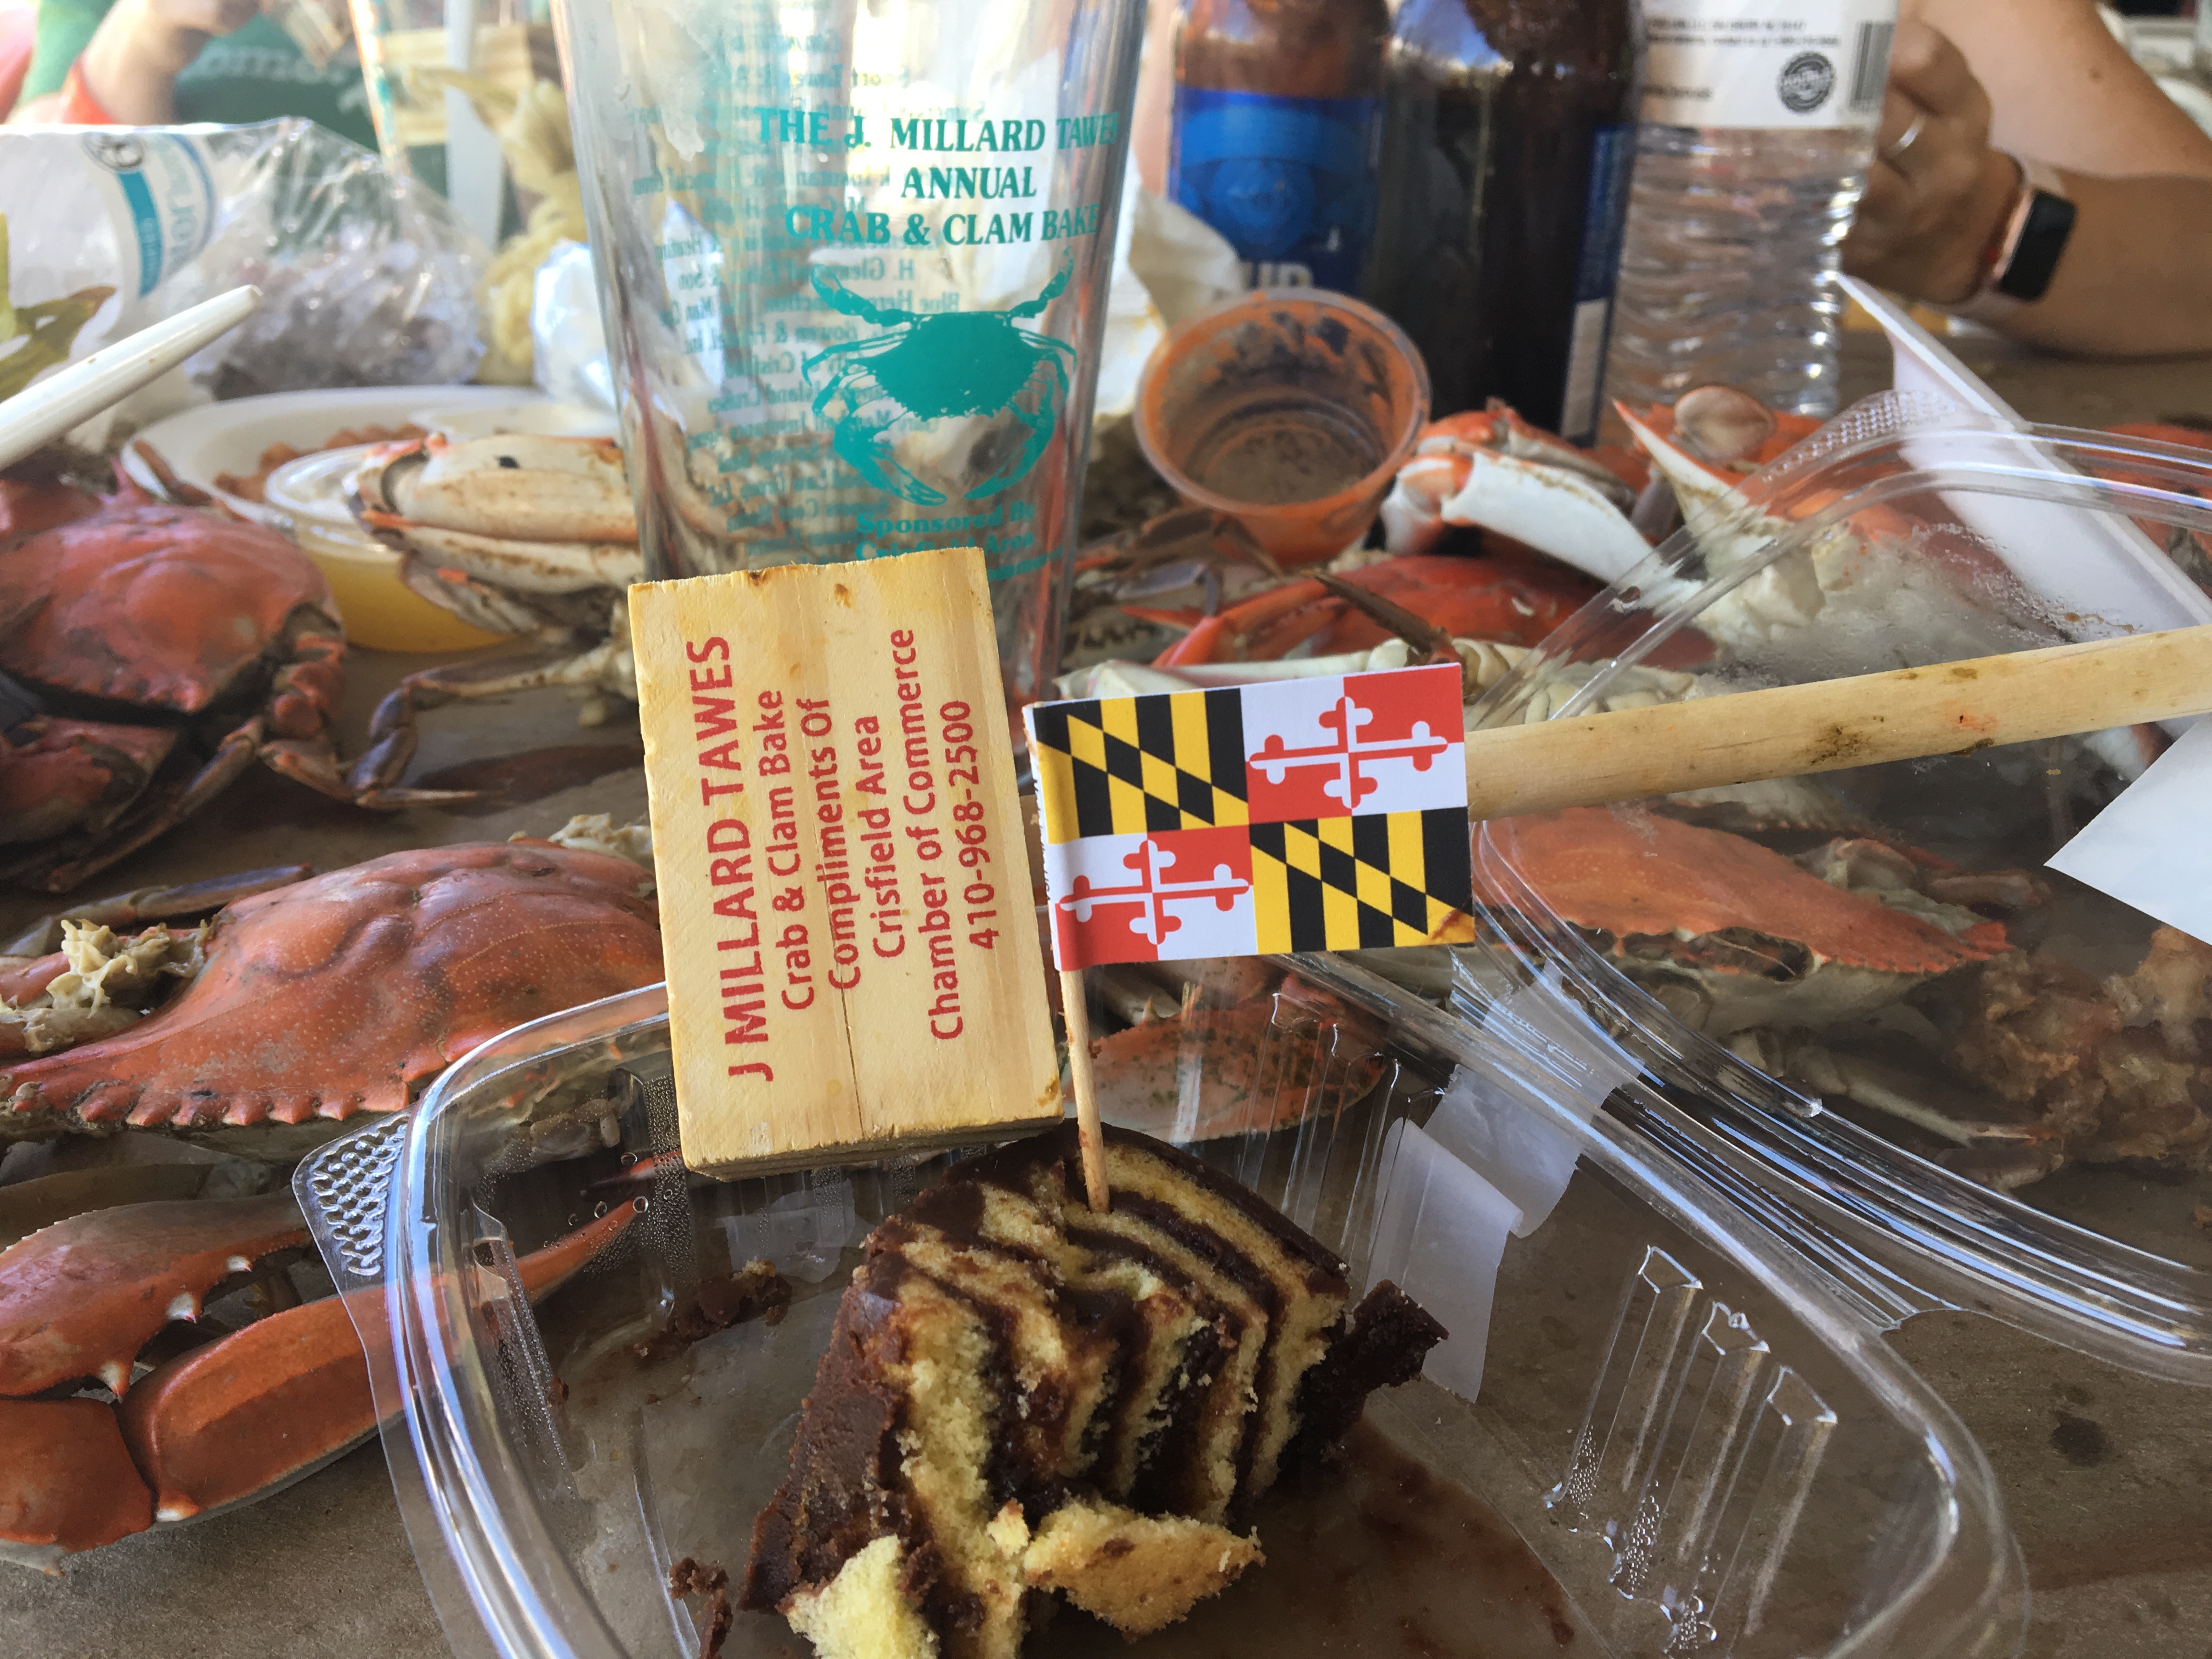 Photo Gallery: Politicos work the Tawes crab feast